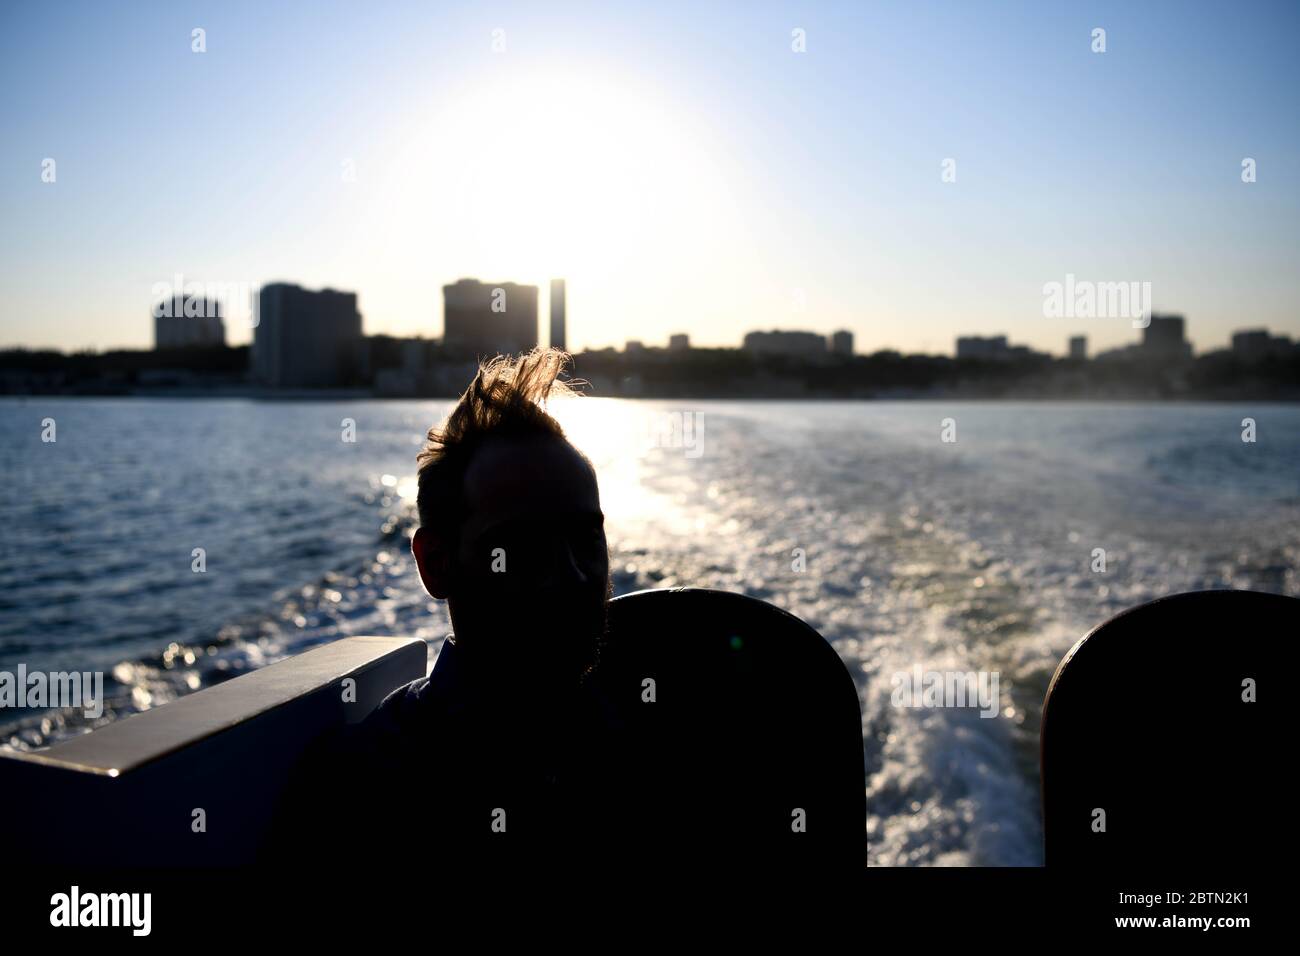 Europe, Ukraine, Odessa. Silhouette of a man against the light on a boat watching the port of Odessa. Stock Photo